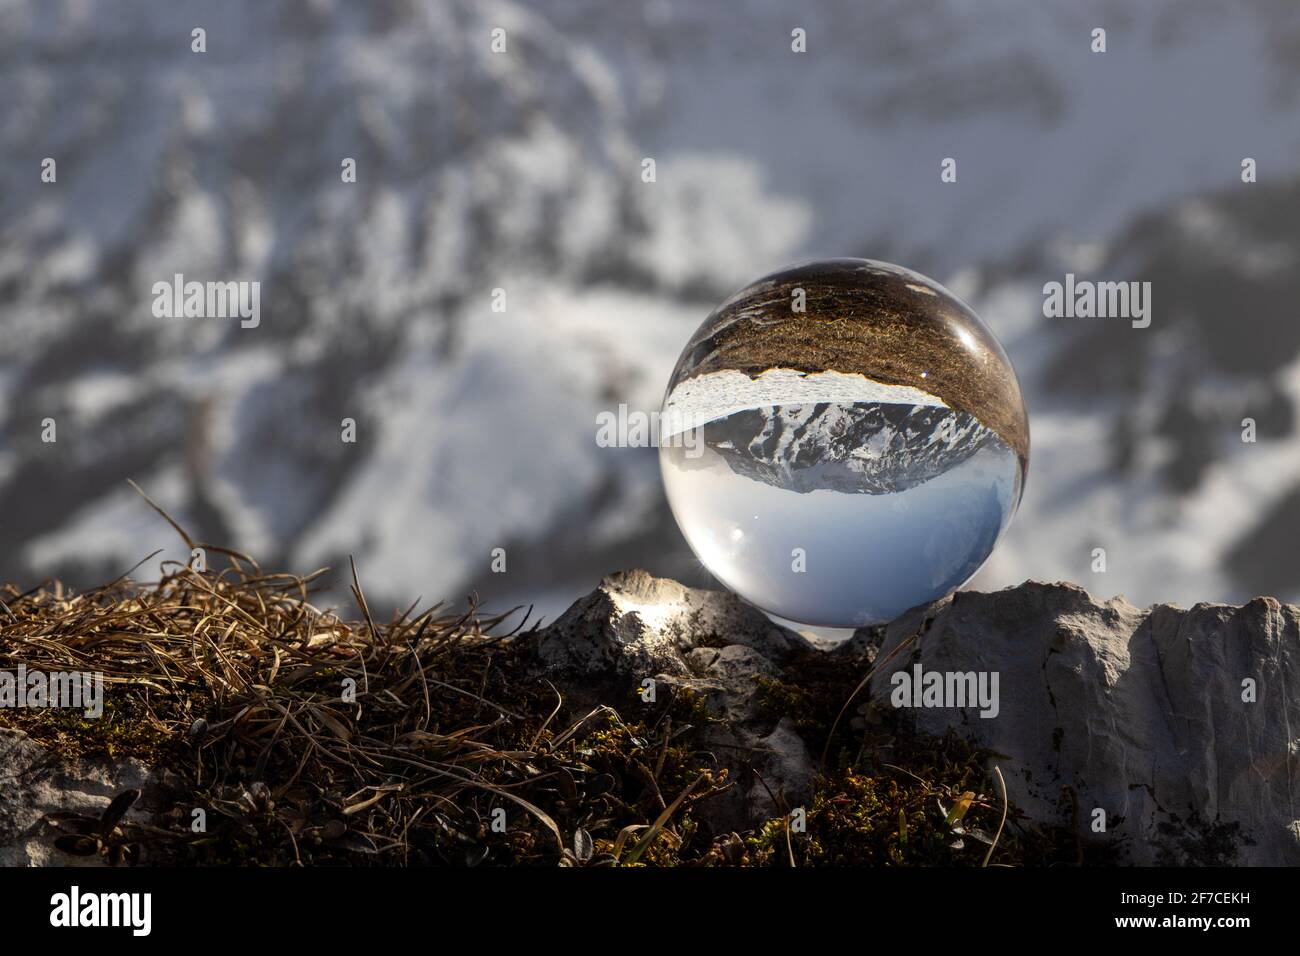 Sunny weather in the snowy mountains through a lens ball Stock Photo